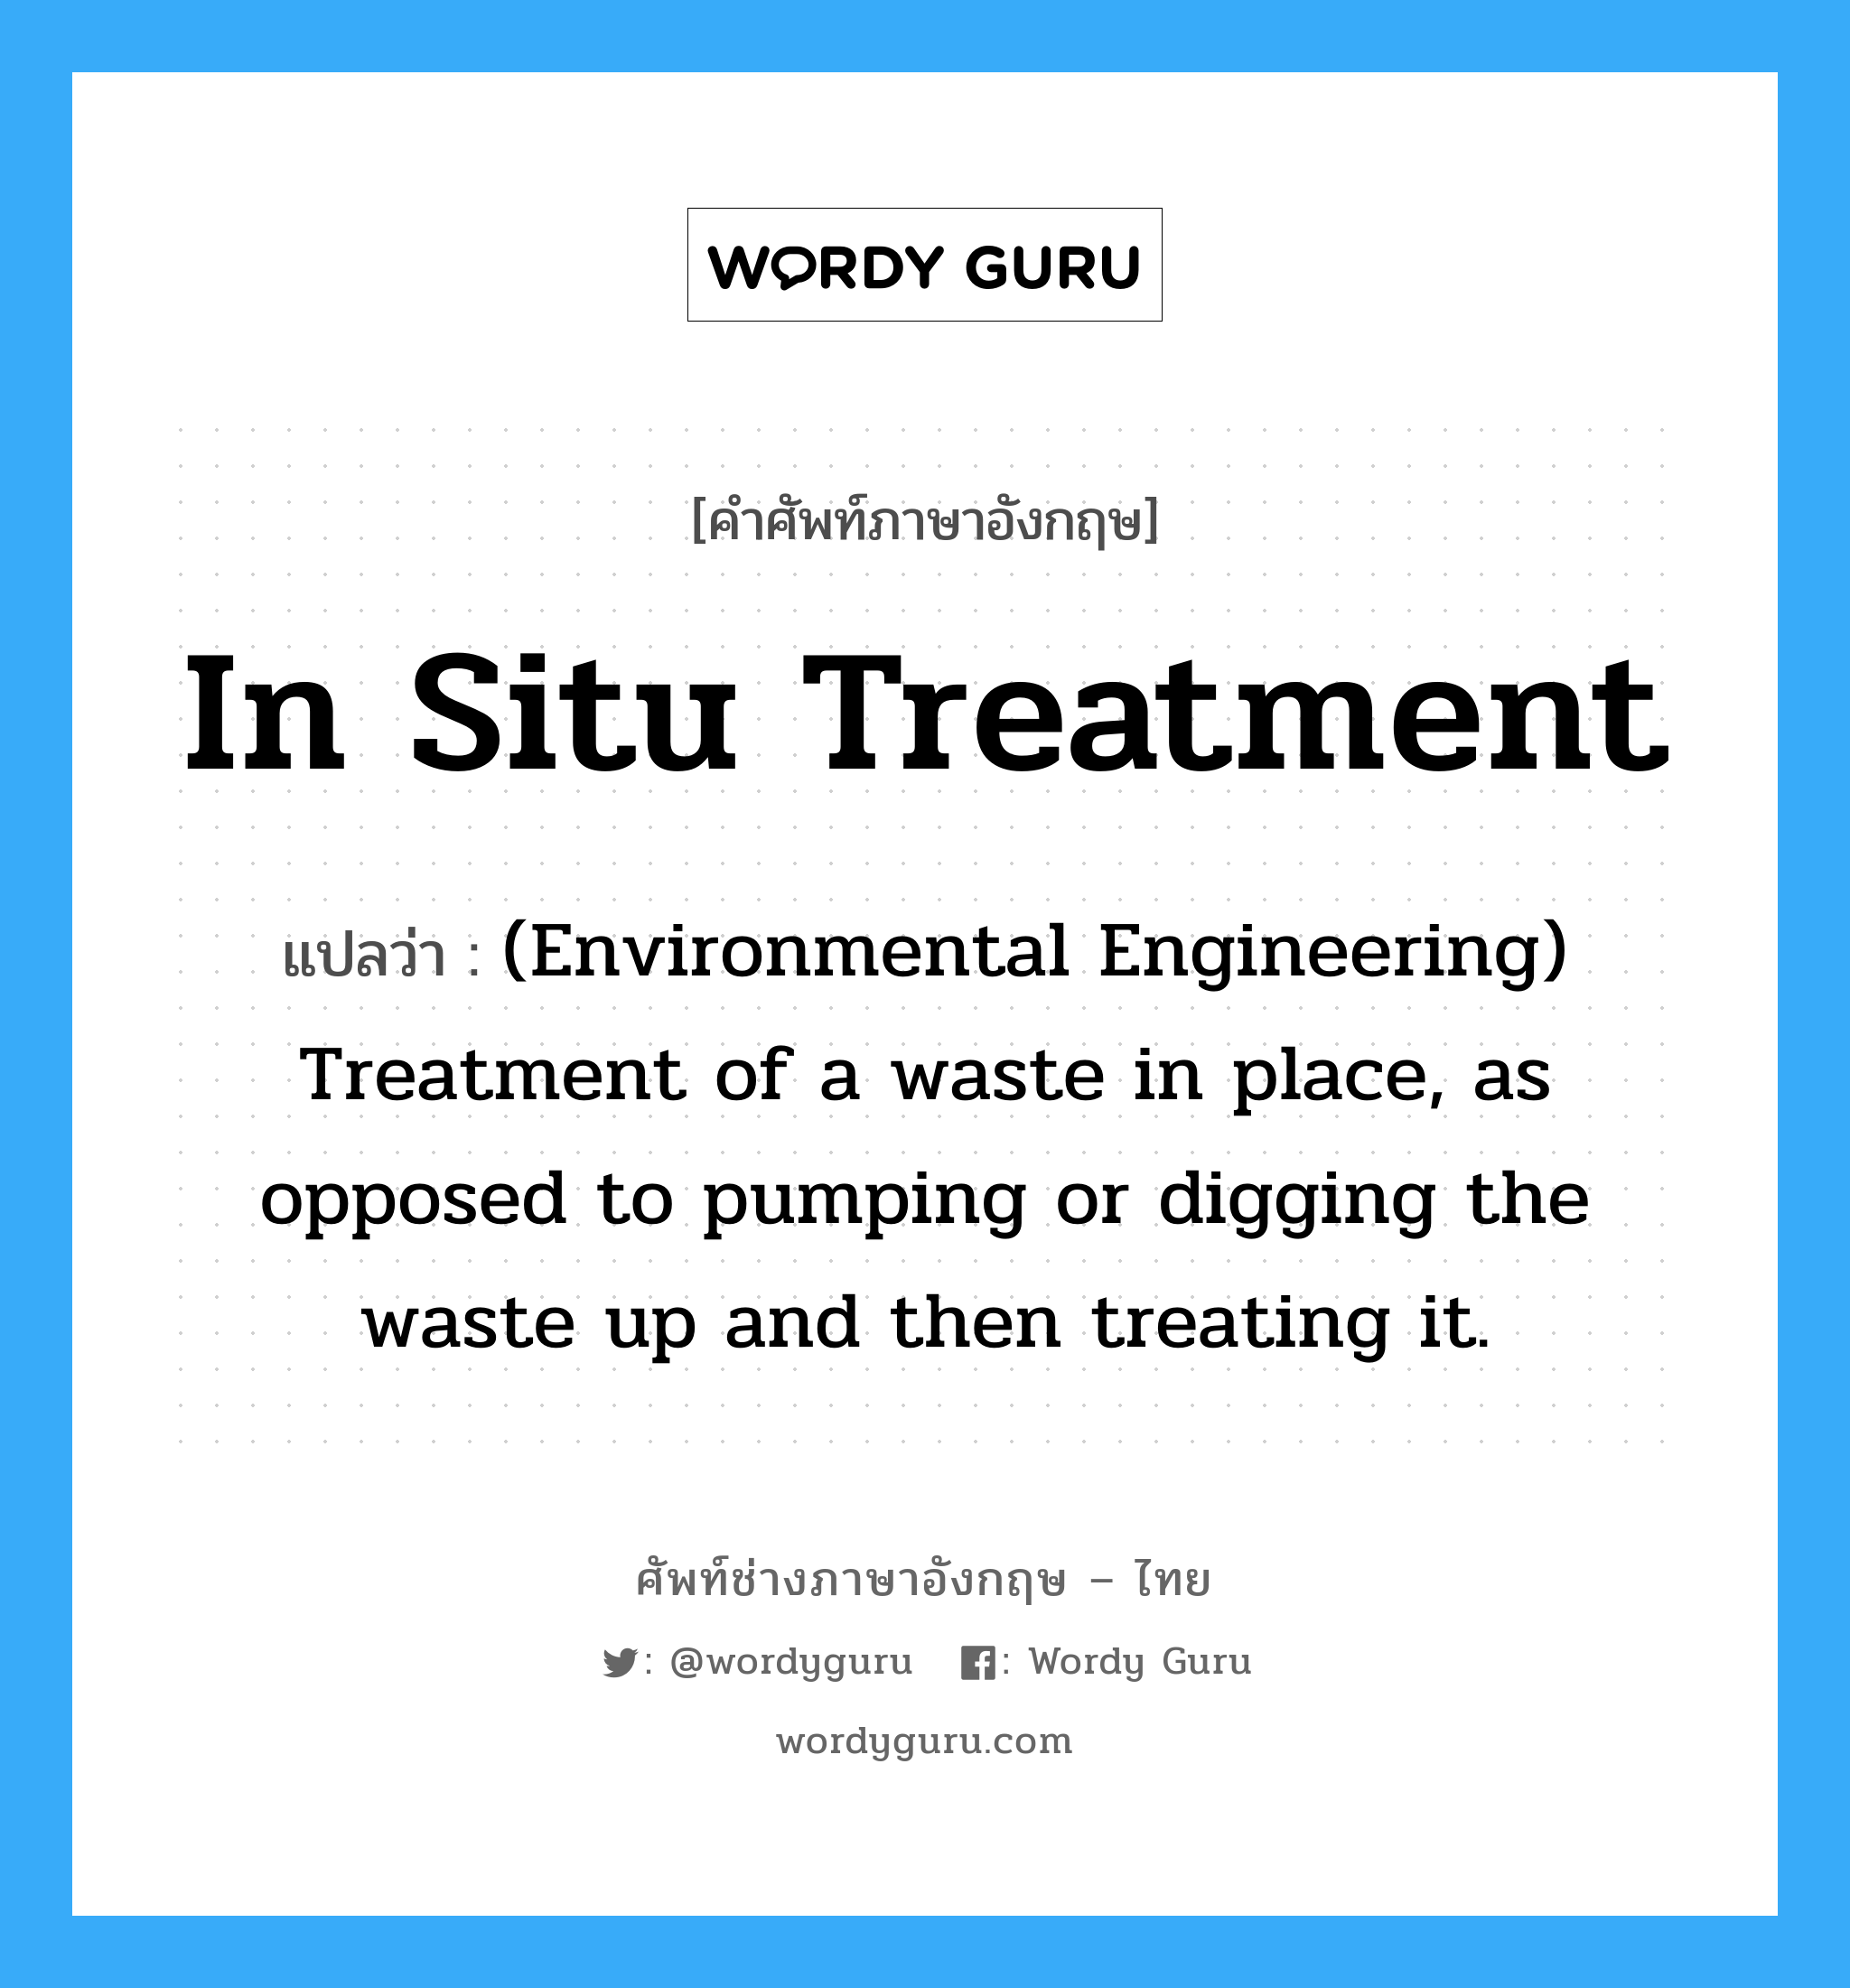 (Environmental Engineering) Treatment of a waste in place, as opposed to pumping or digging the waste up and then treating it. ภาษาอังกฤษ?, คำศัพท์ช่างภาษาอังกฤษ - ไทย (Environmental Engineering) Treatment of a waste in place, as opposed to pumping or digging the waste up and then treating it. คำศัพท์ภาษาอังกฤษ (Environmental Engineering) Treatment of a waste in place, as opposed to pumping or digging the waste up and then treating it. แปลว่า In situ treatment